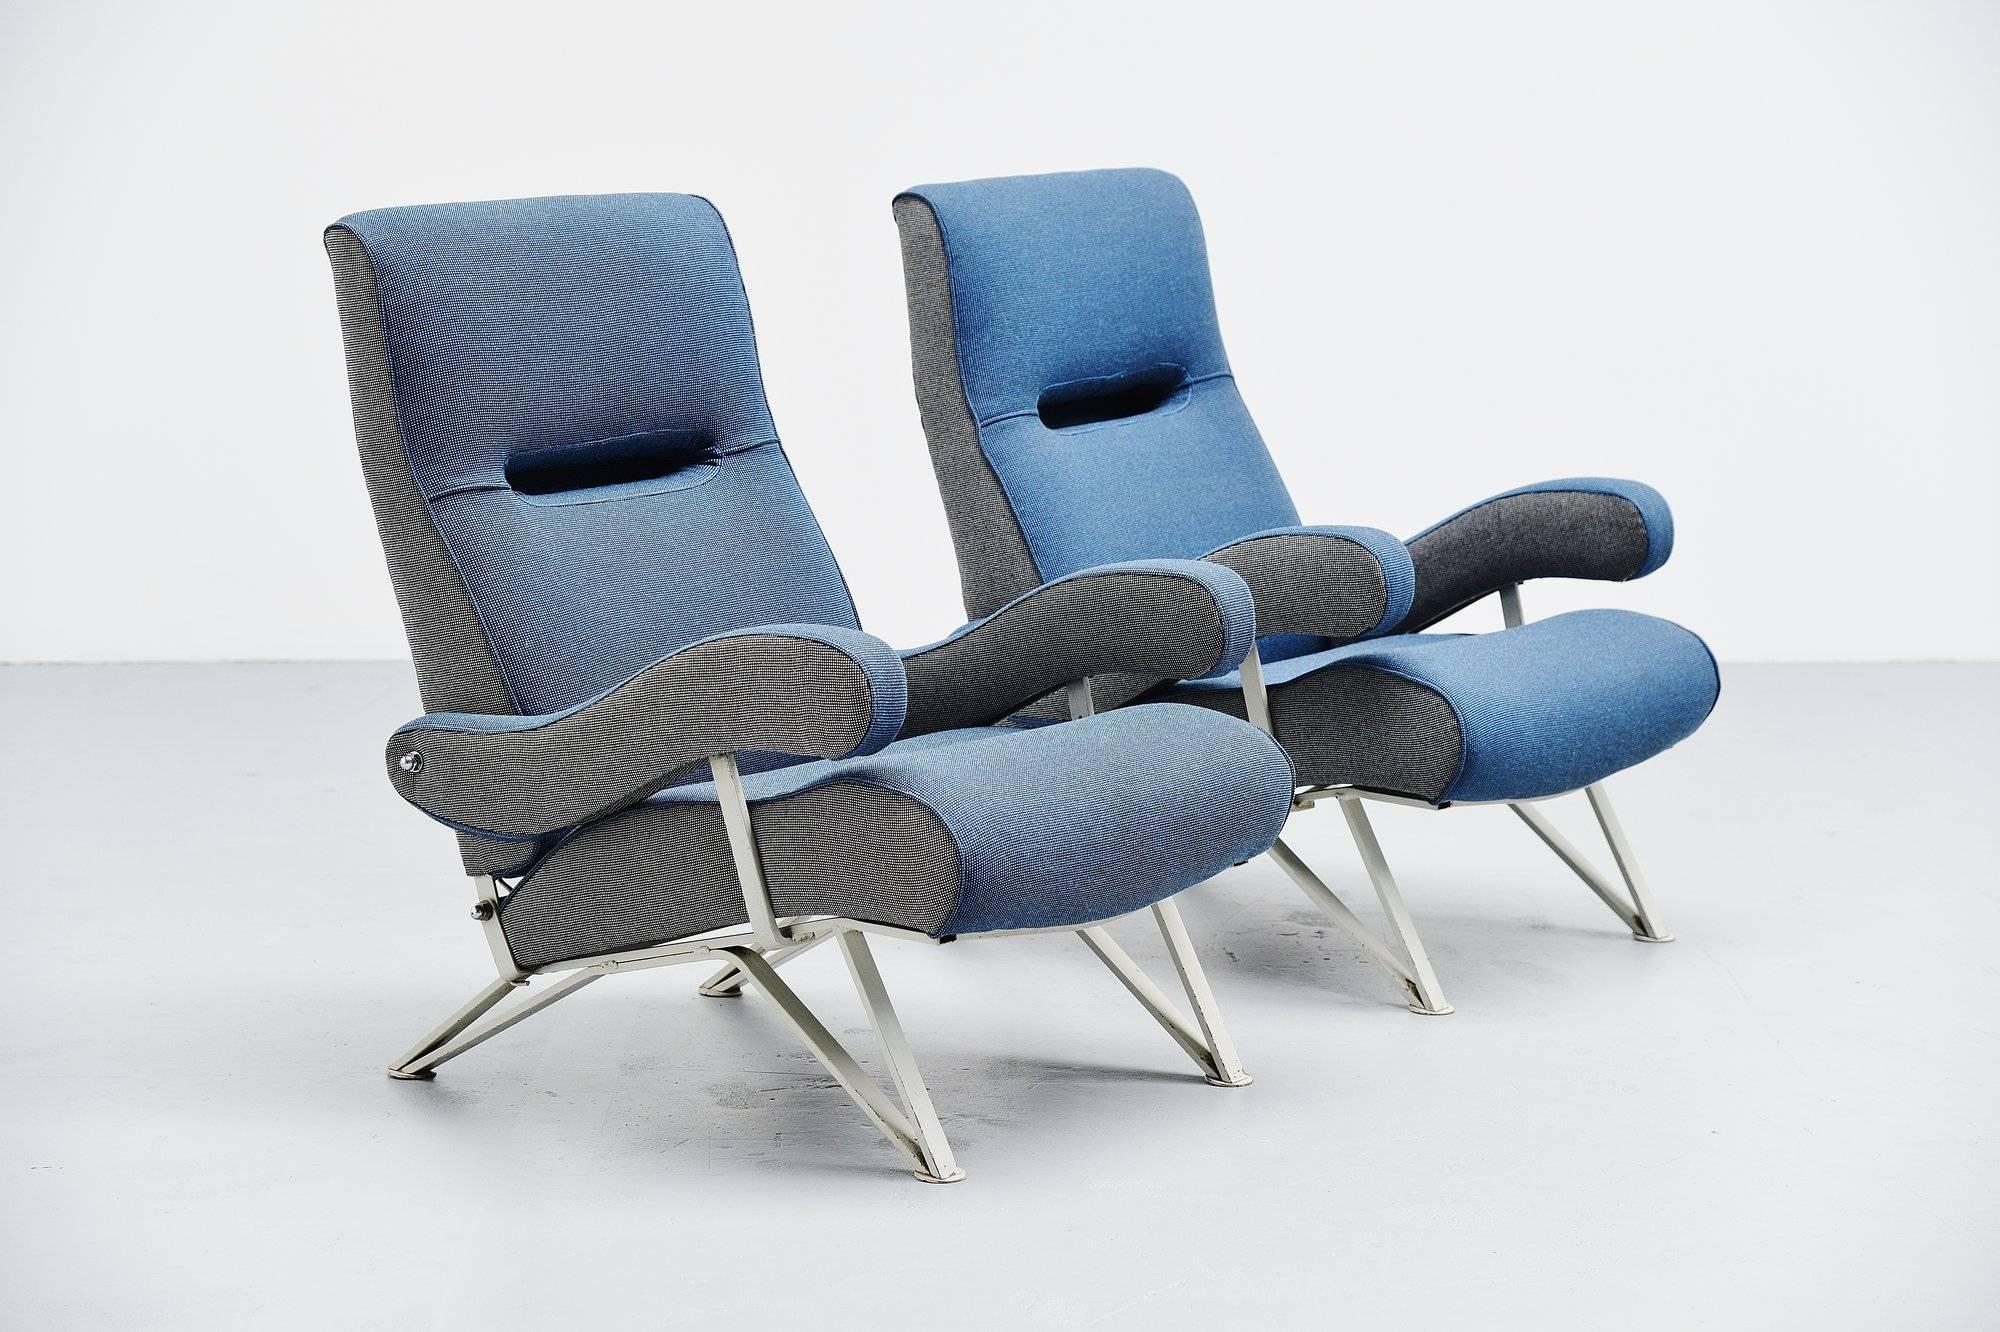 Fantastic shaped pair of reclining chairs designed by Gianni Moscatelli and manufactured by Formanova, Italy, 1959. The chairs have light grey painted metal frames and are newly upholstered with high quality fabric by de Ploeg. Very nice two tone